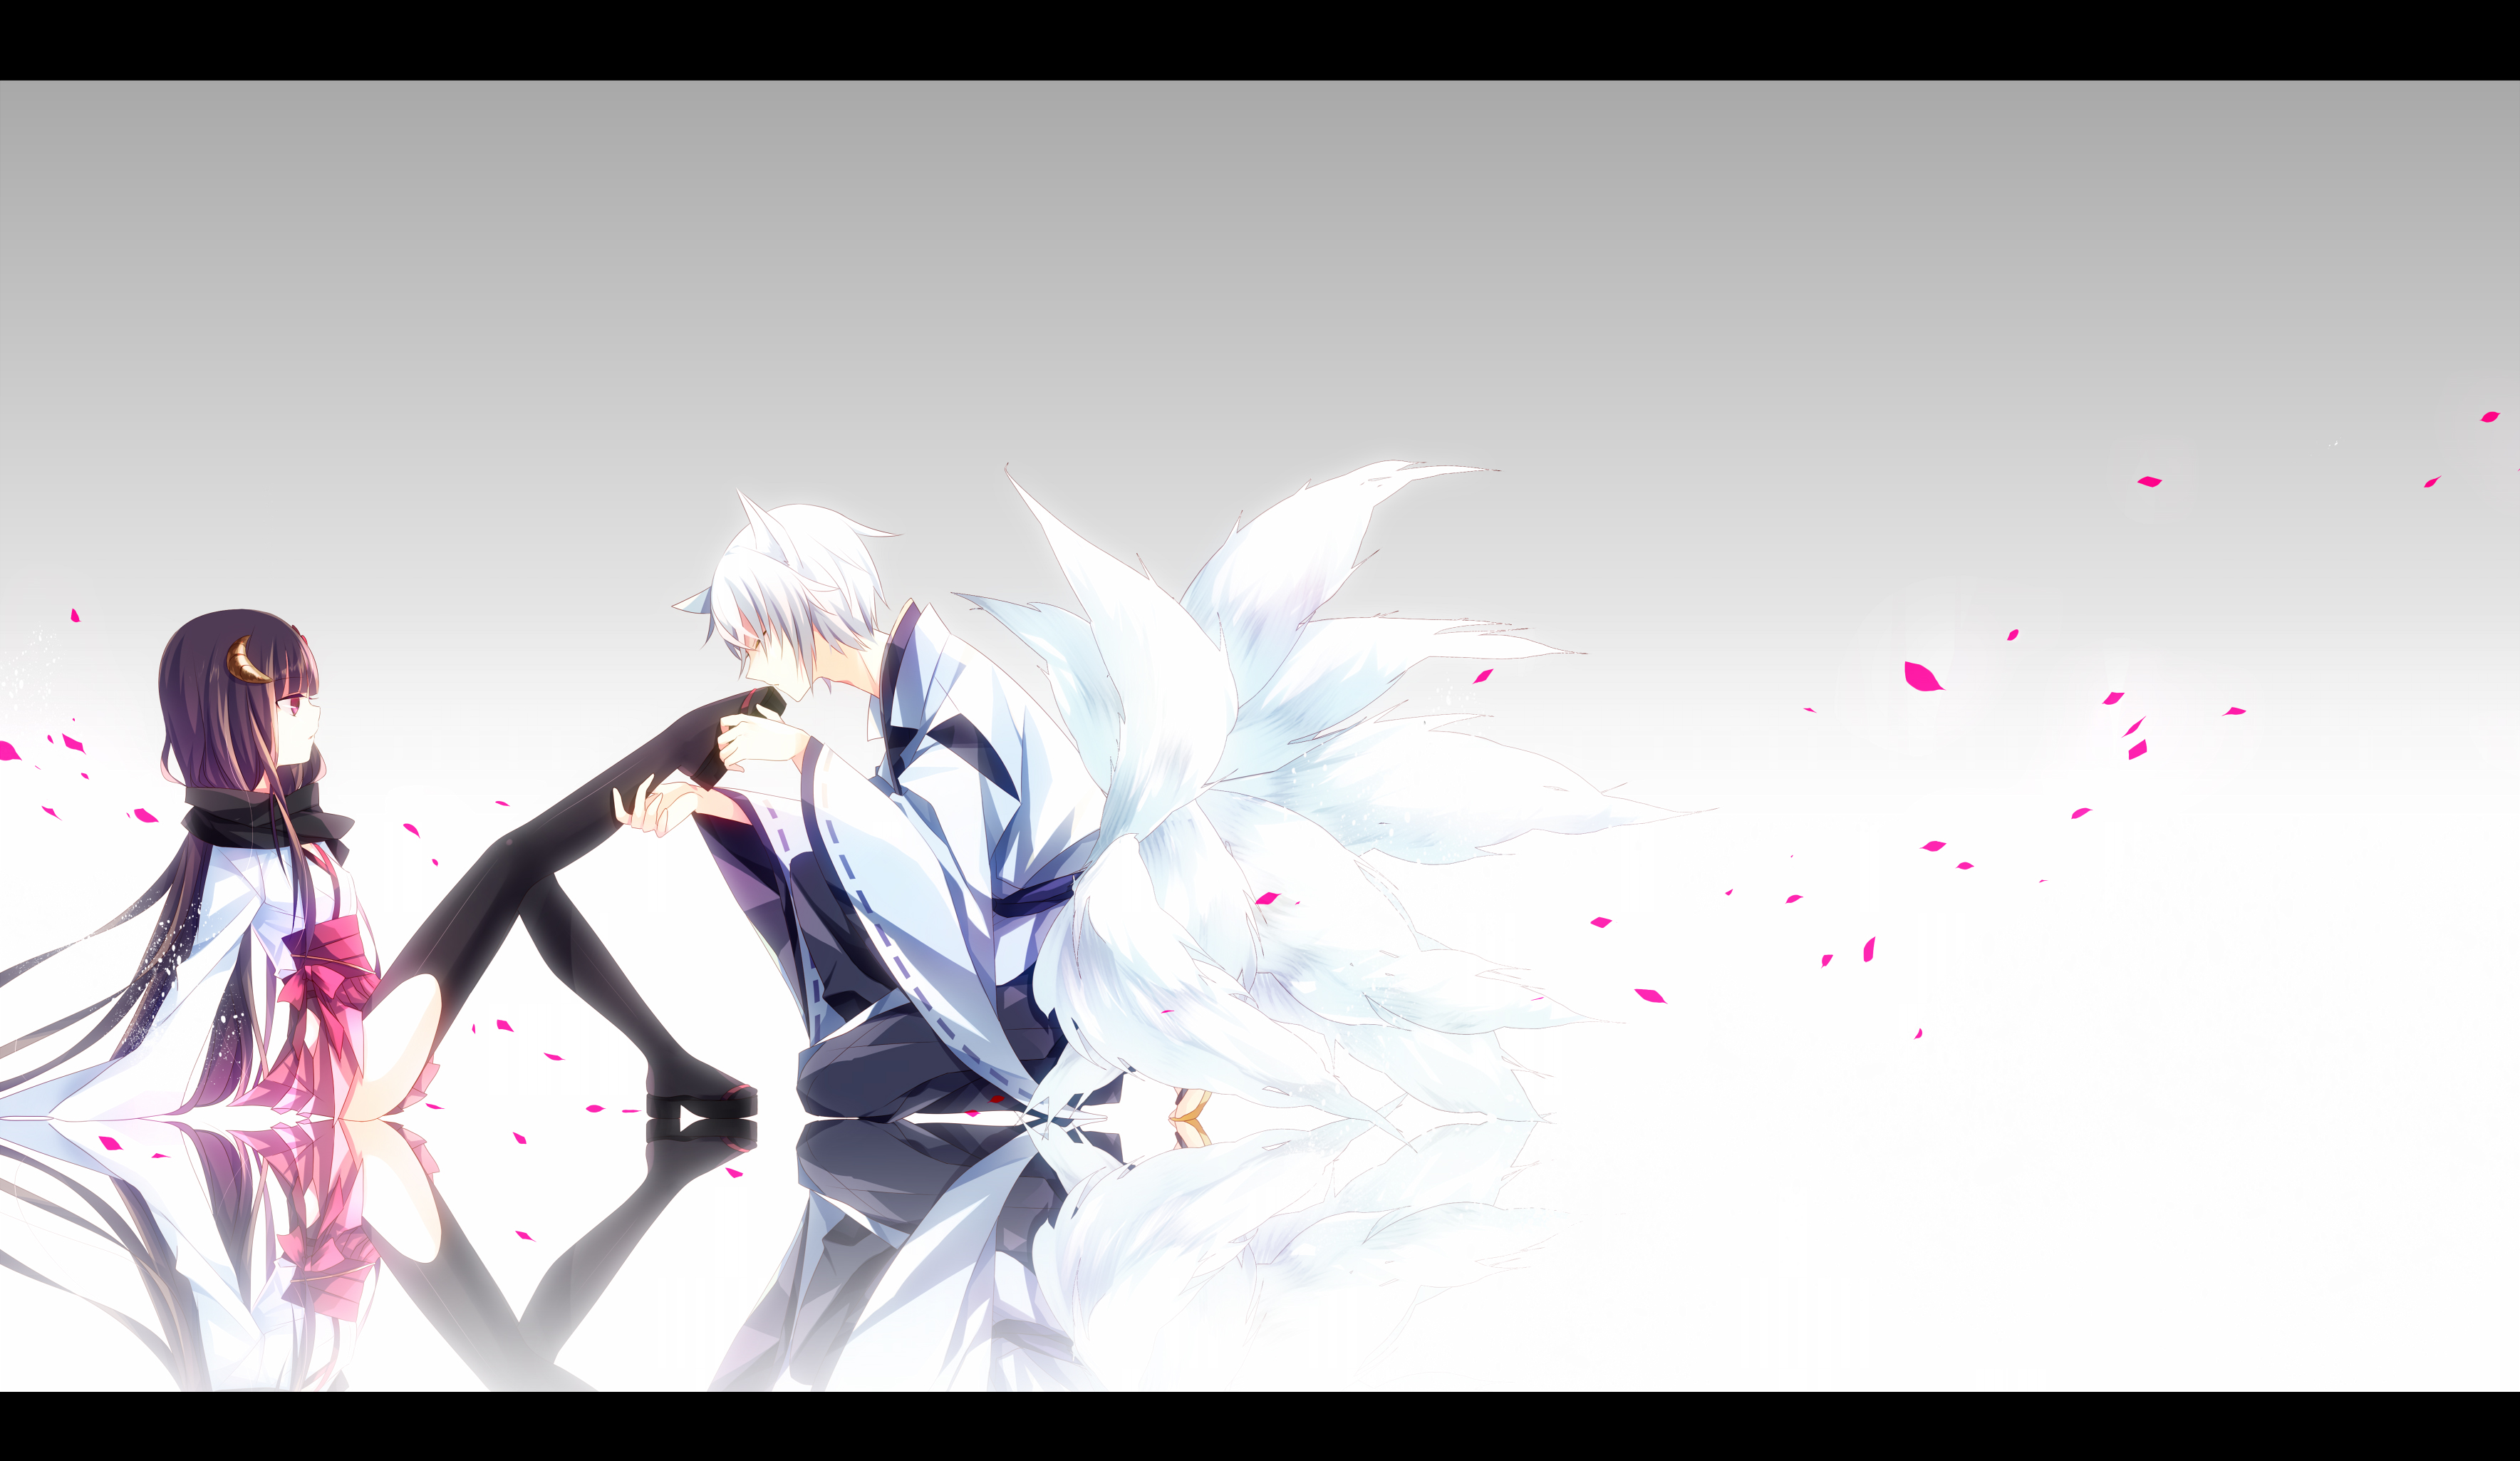 Inu × Boku SS Backgrounds, Compatible - PC, Mobile, Gadgets| 3537x2050 px